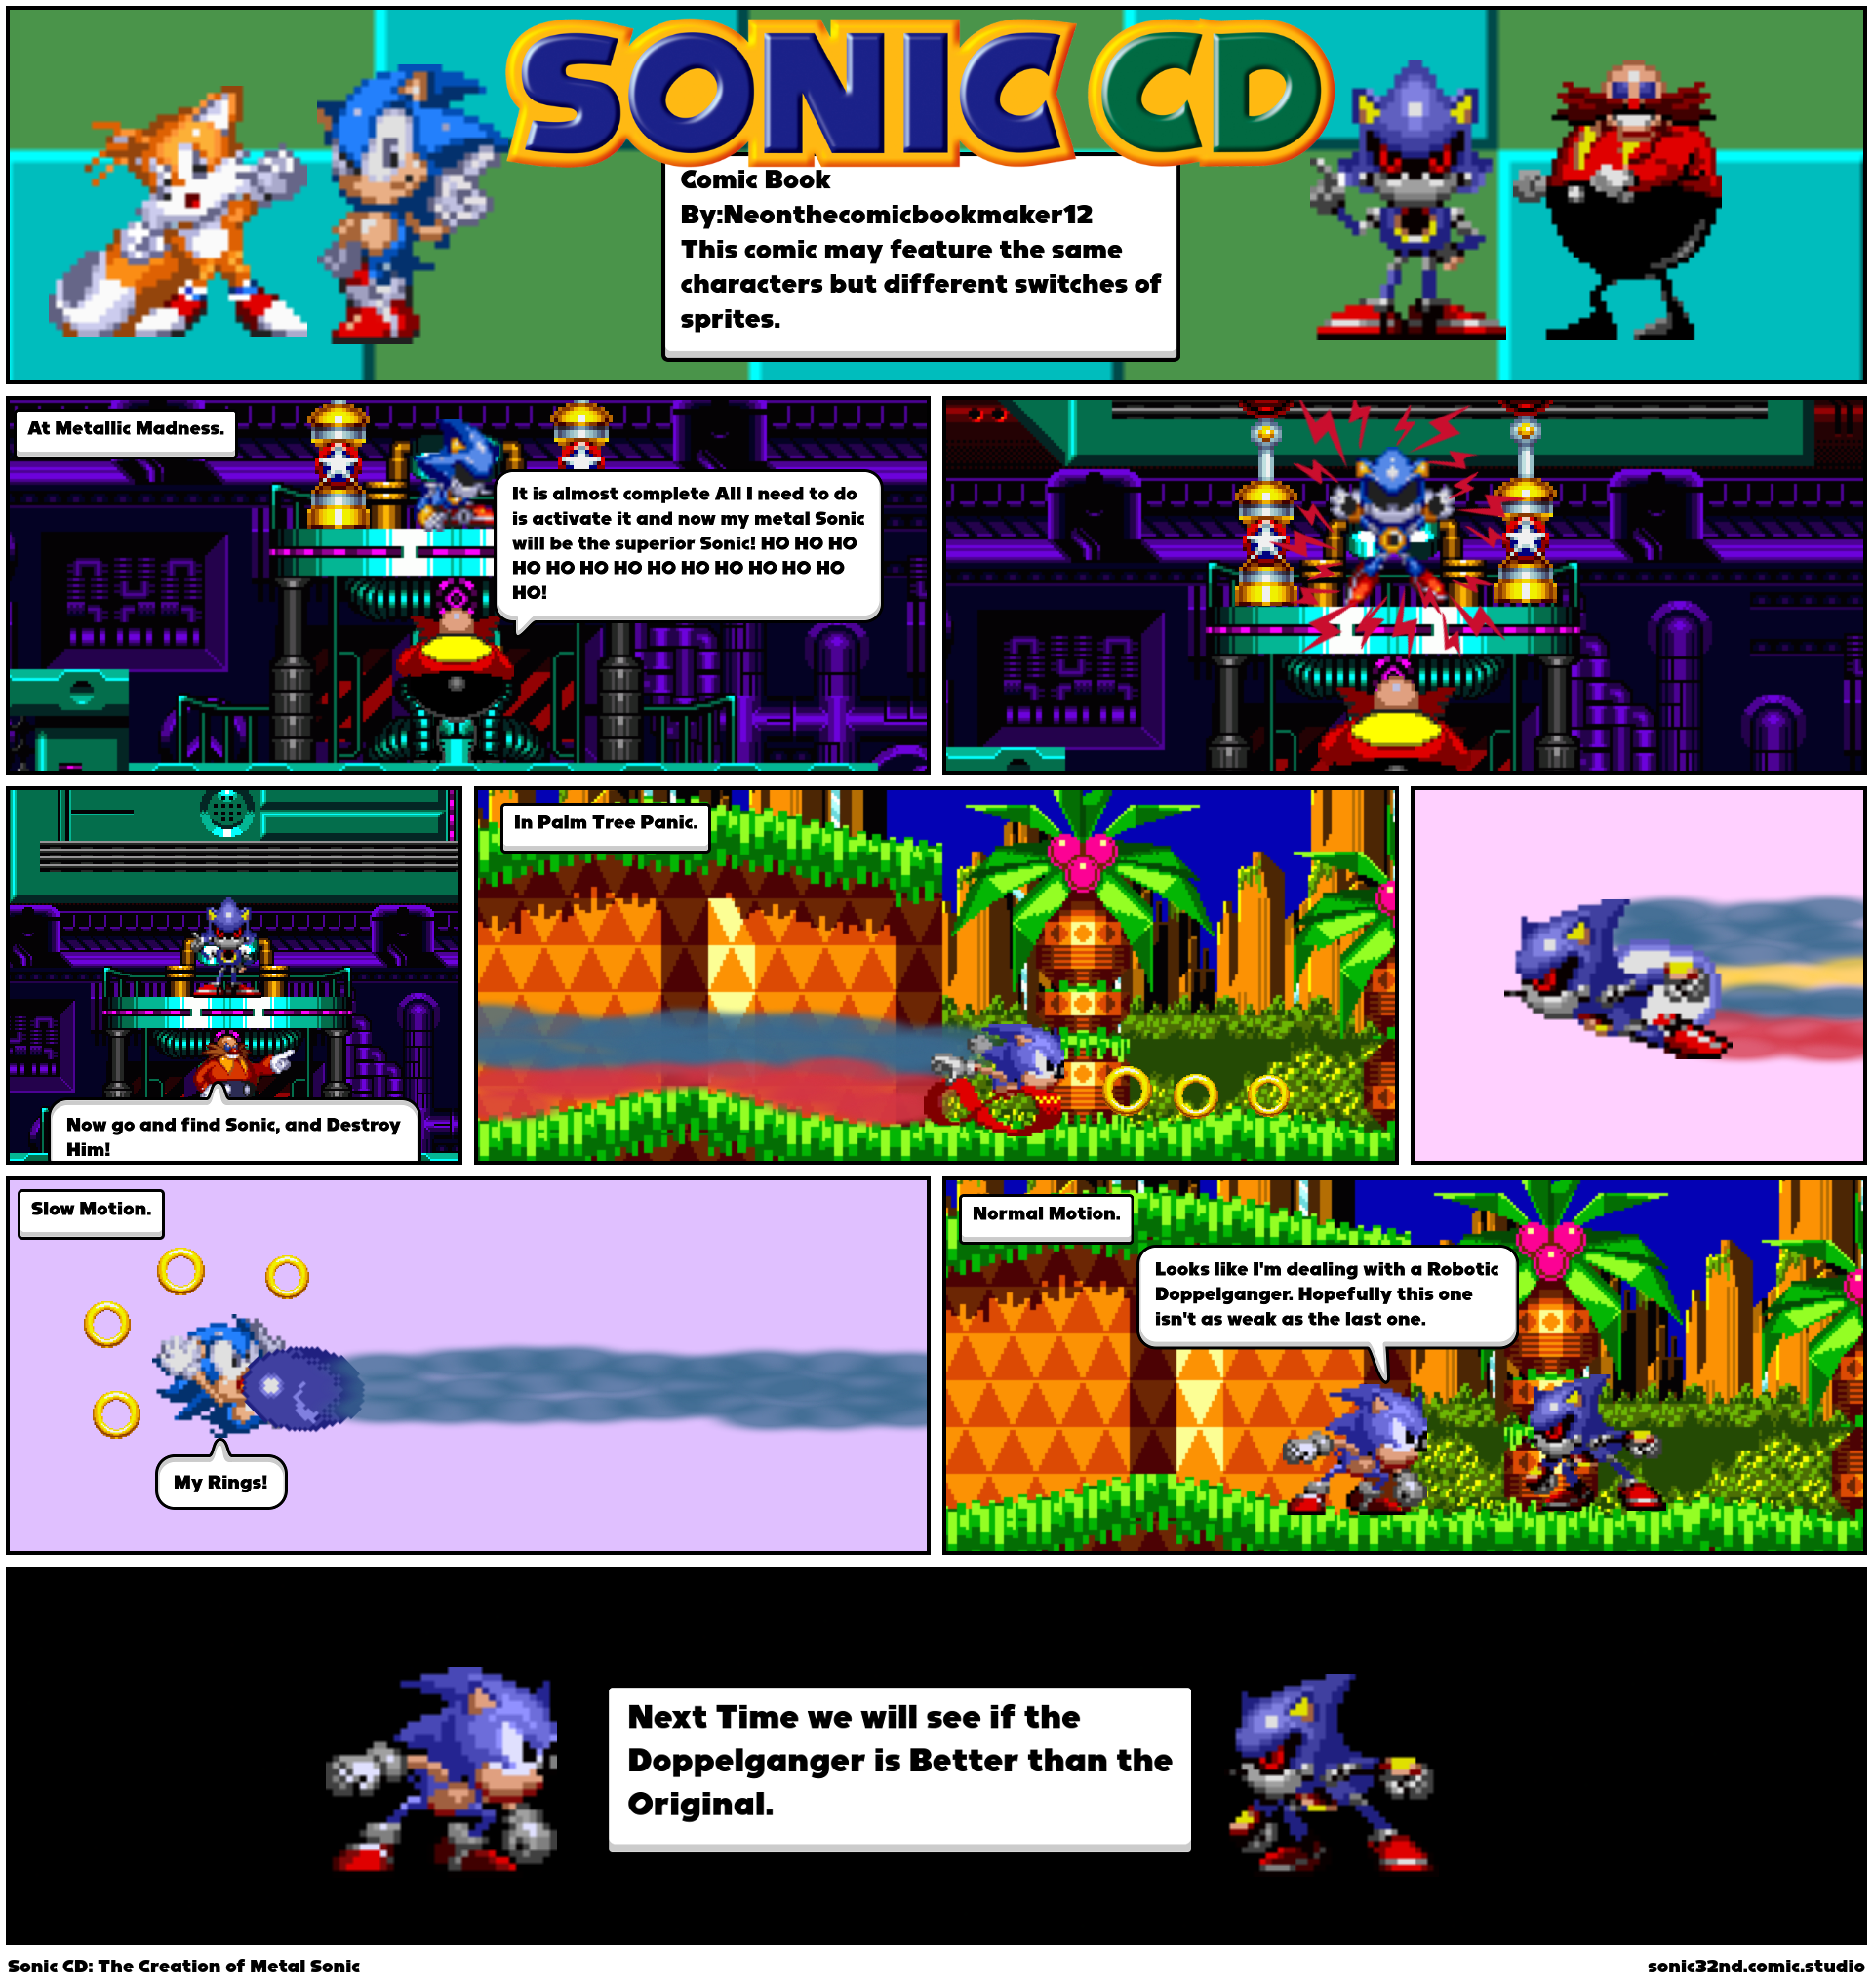 Sonic CD: The Creation of Metal Sonic